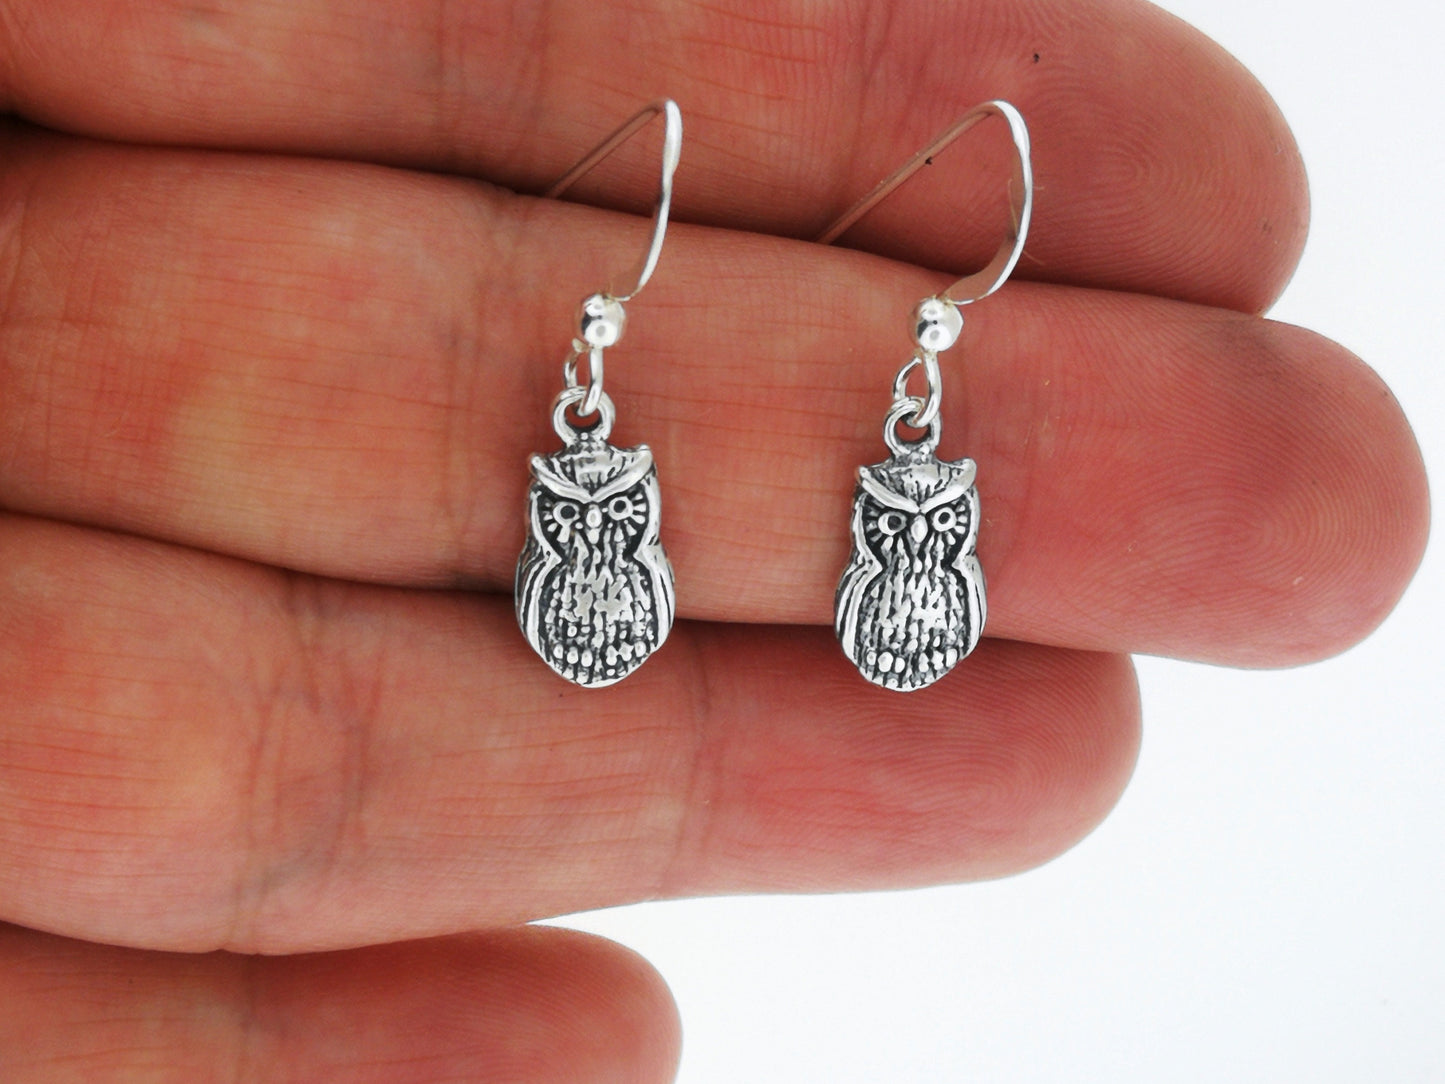 Owl Charm Earrings in Sterling Silver or Antique bronze